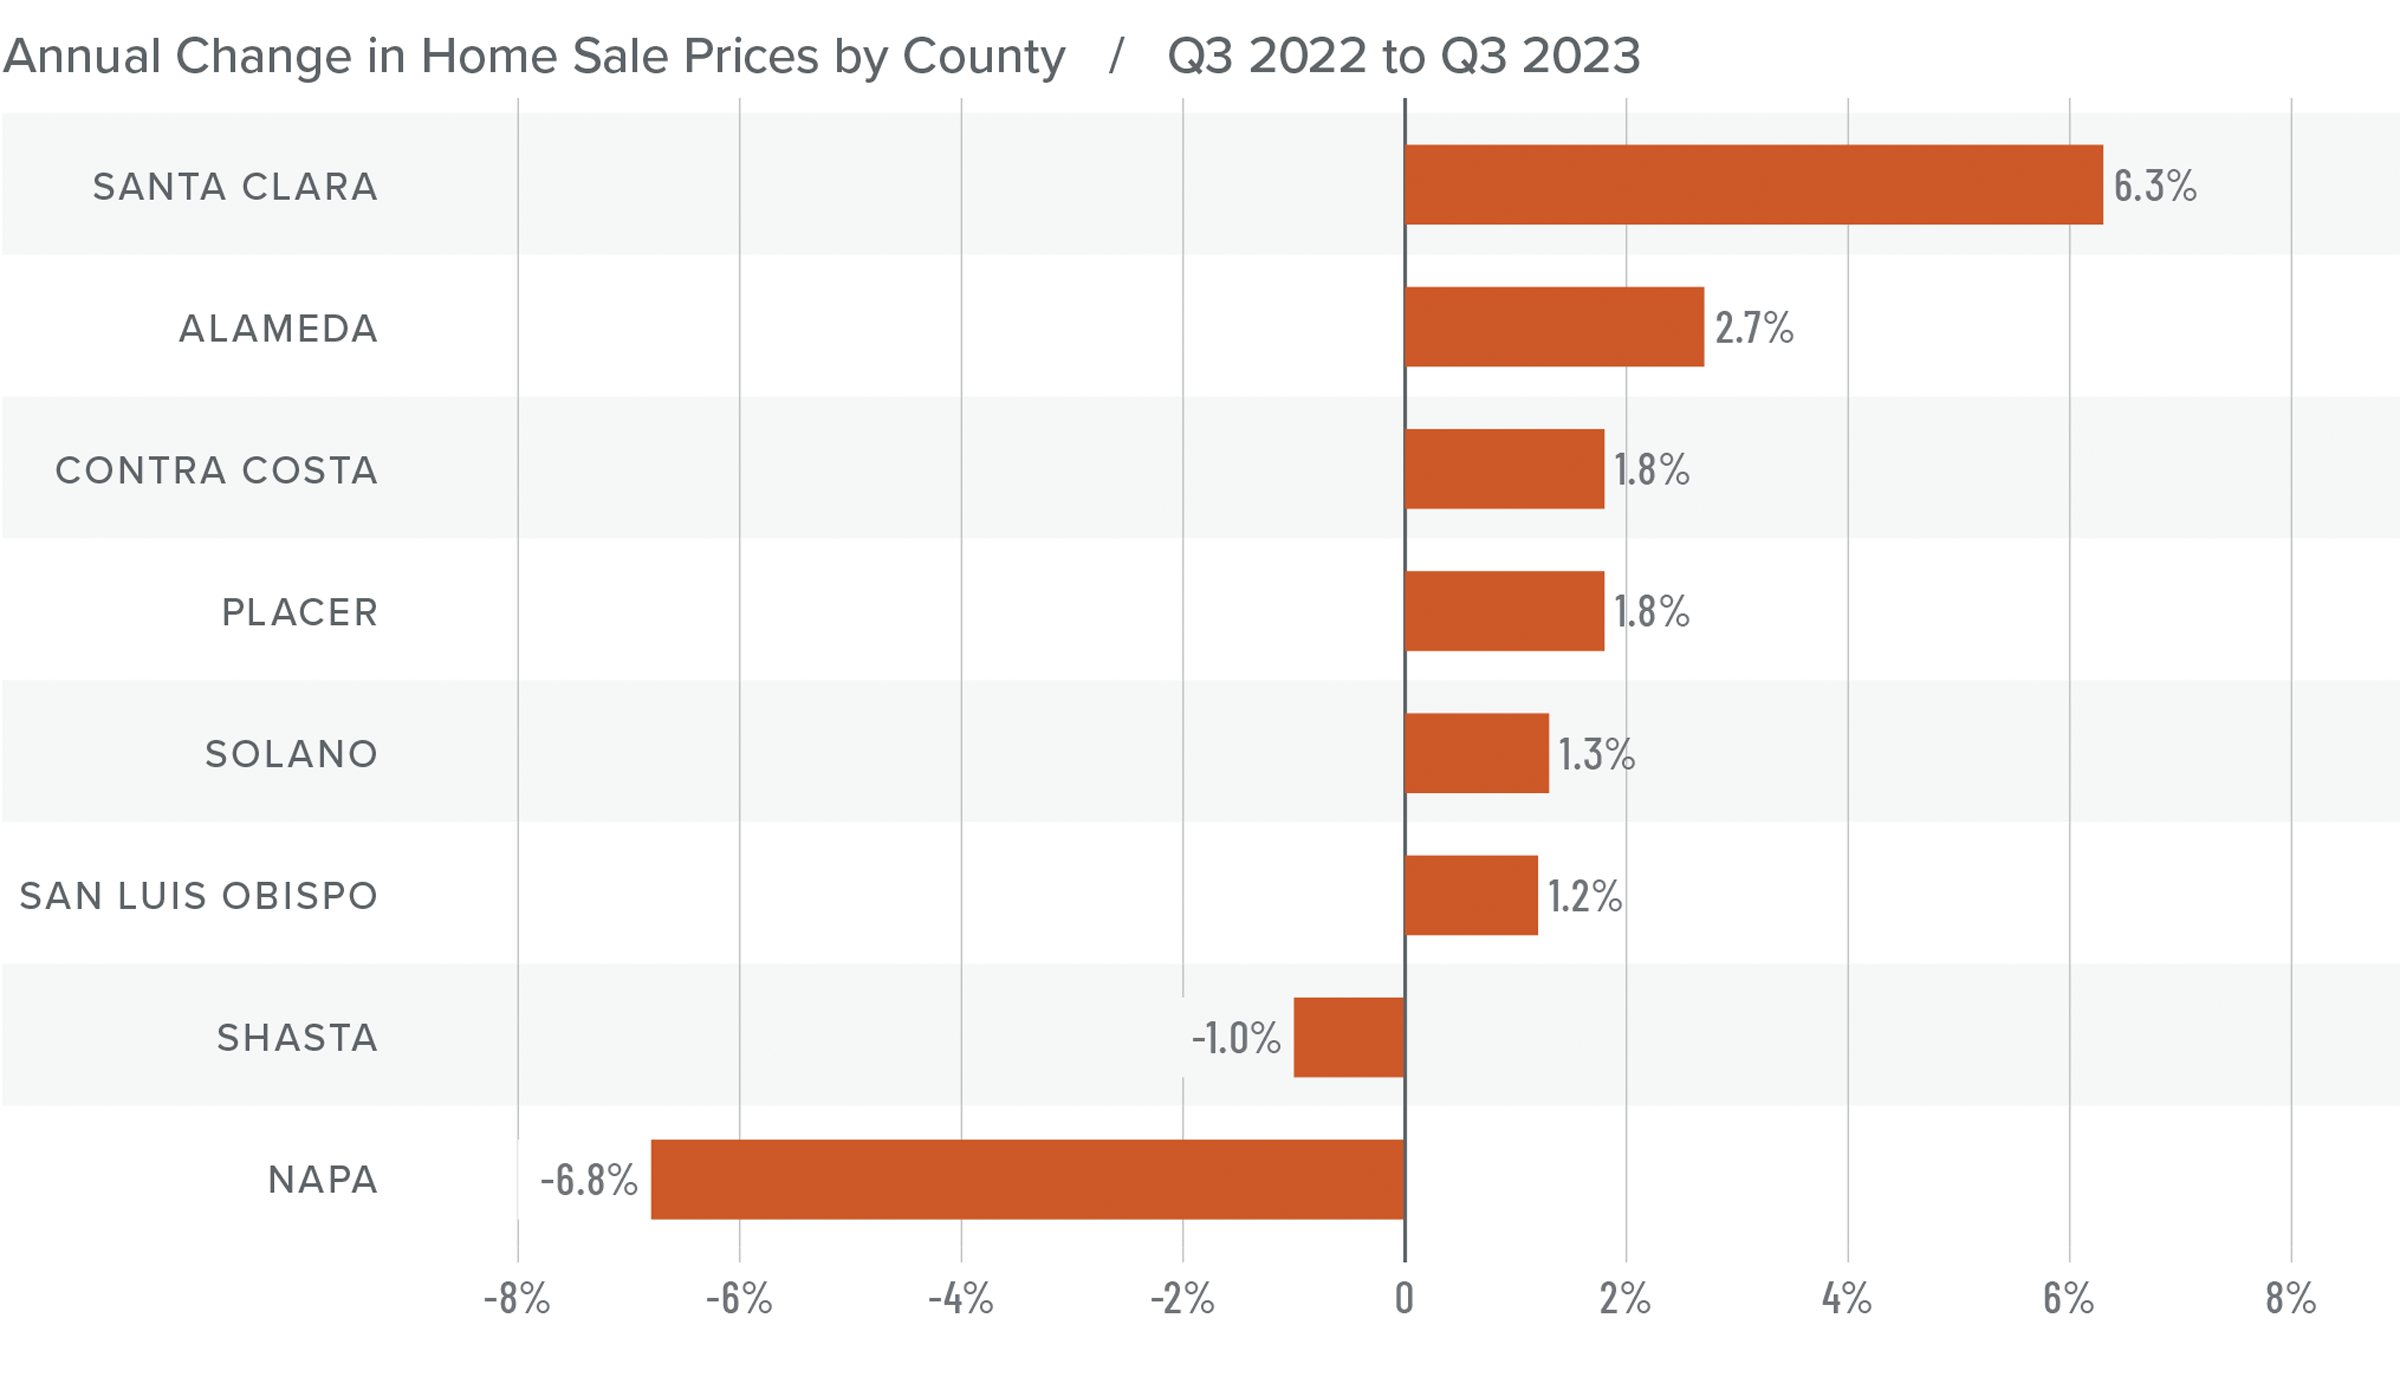 A bar graph showing the annual change in home sale prices by county in Northern California from Q3 2022 to Q3 2023. Shasta had the least change at -1% while Napa had the greatest decrease of 6.8% and the rest of the counties all saw increases. Santa Clara had the greatest increase of 6.3%.